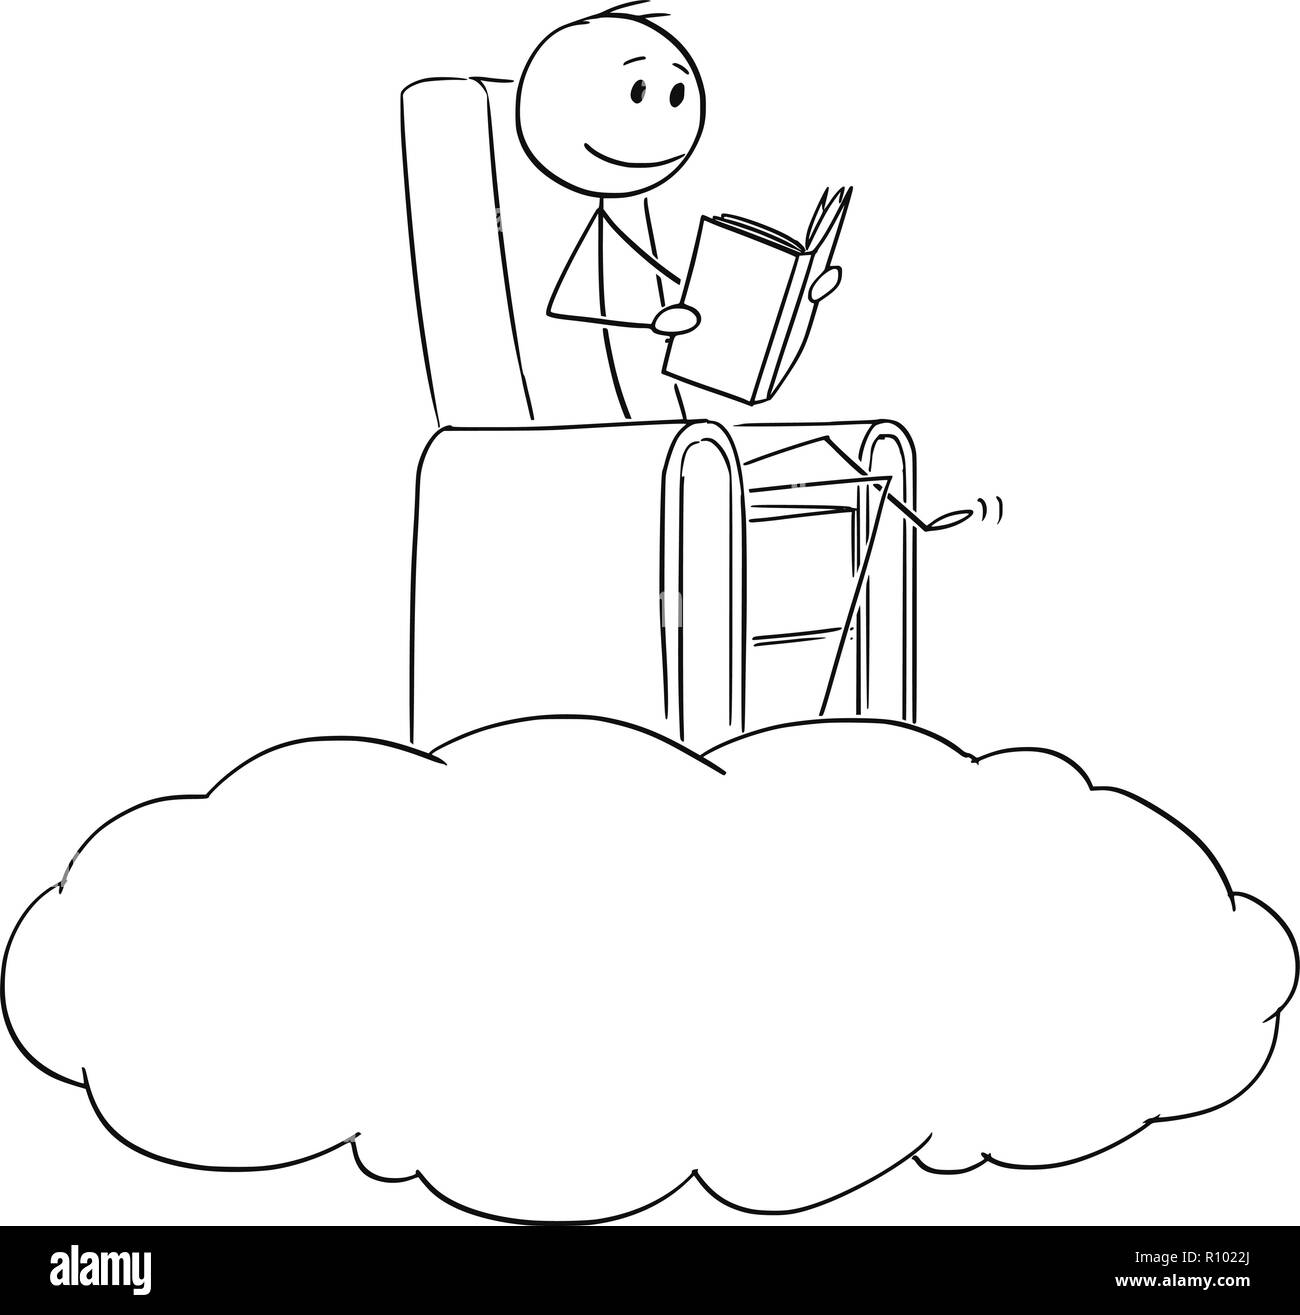 Cartoon of Man and Dreamer Reading a Book on a Cloud Stock Vector